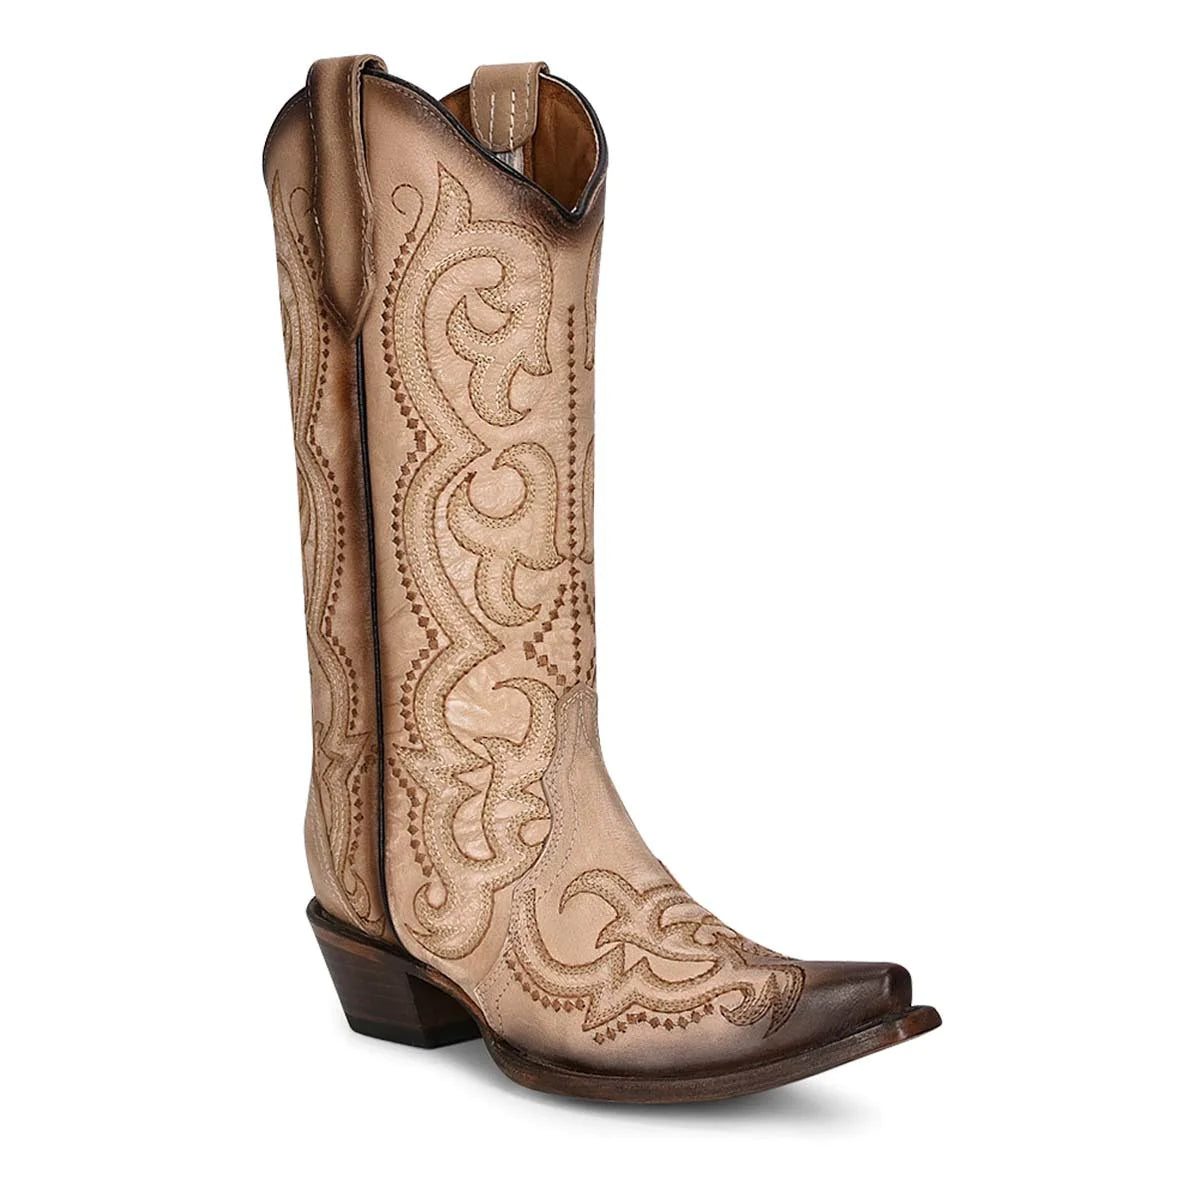 WOMEN'S CIRCLE G SAND WITH EMBROIDERY BOOTS L5870